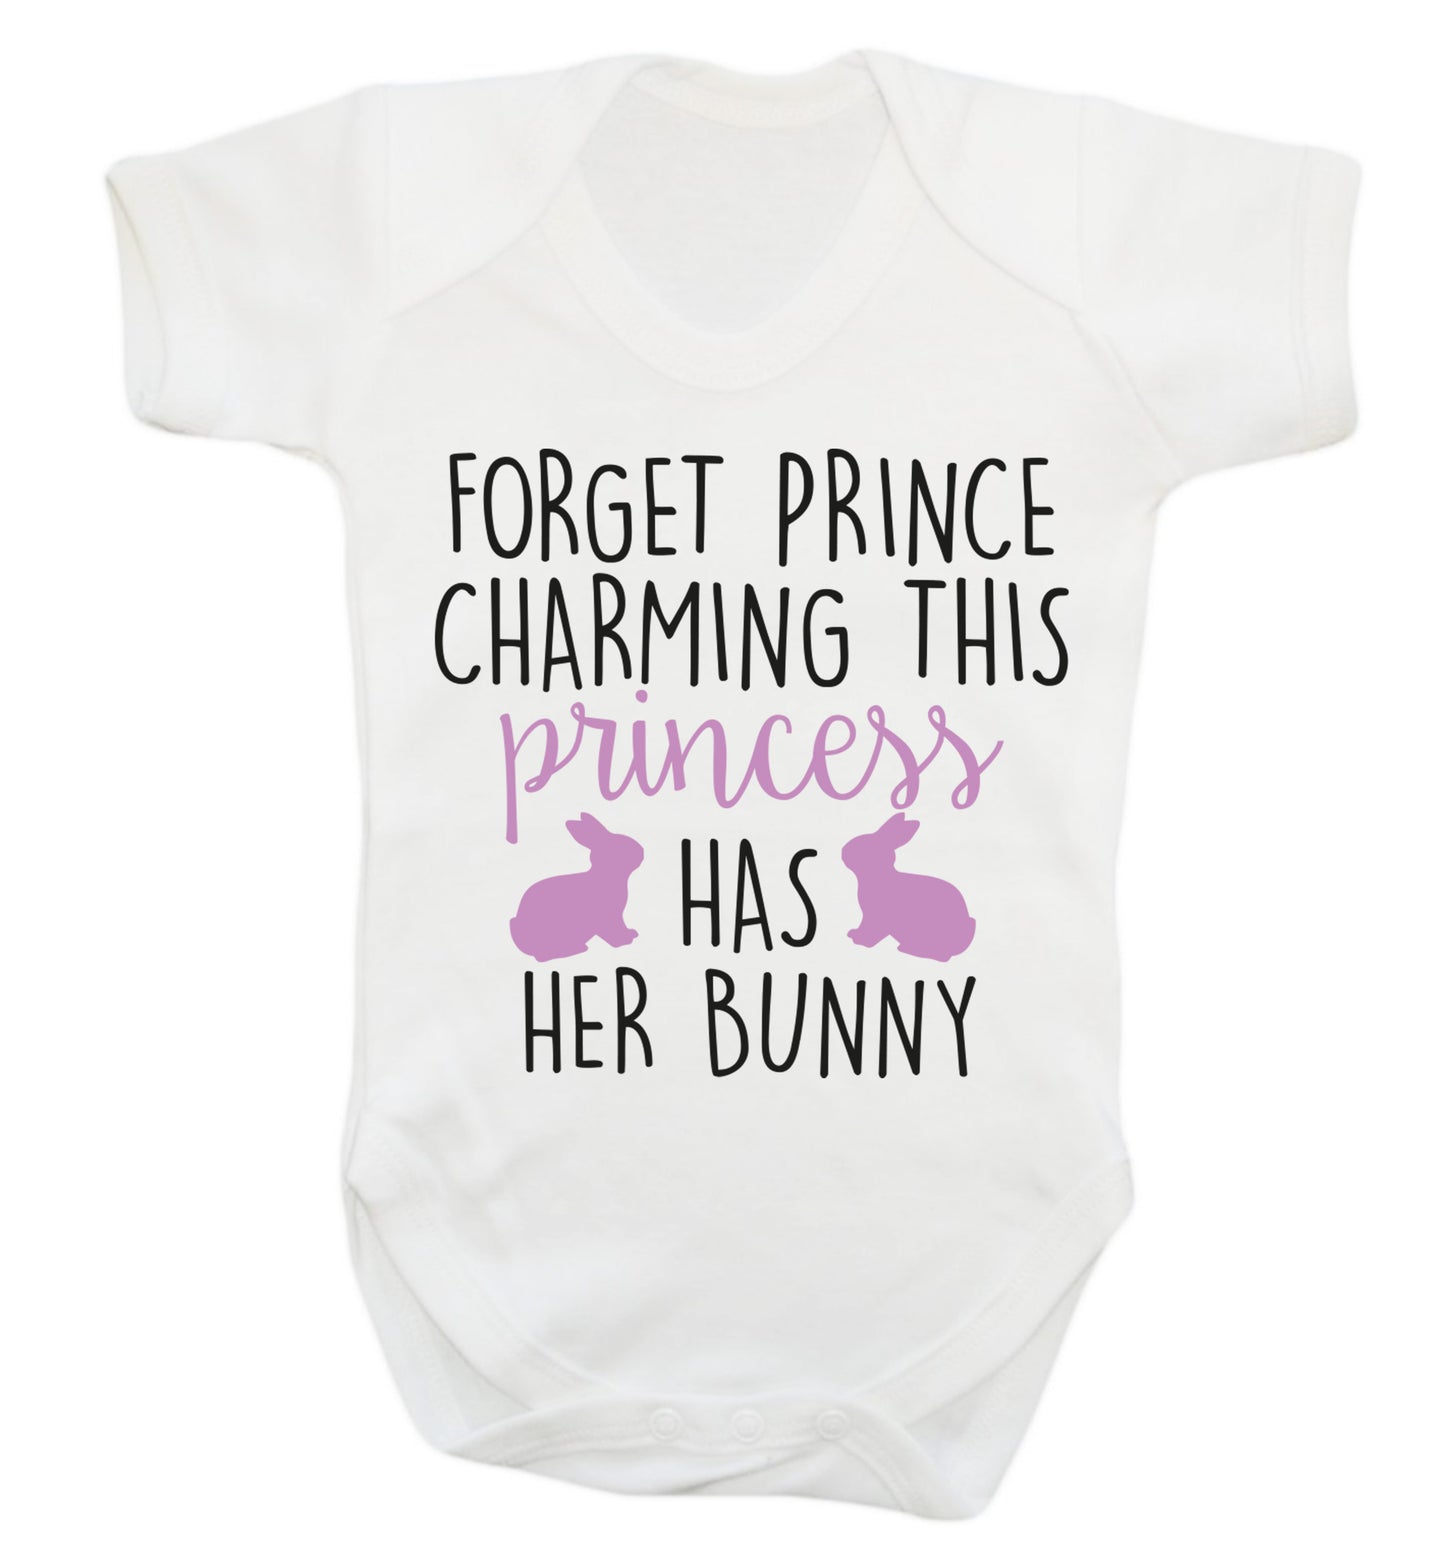 Forget prince charming this princess has her bunny Baby Vest white 18-24 months